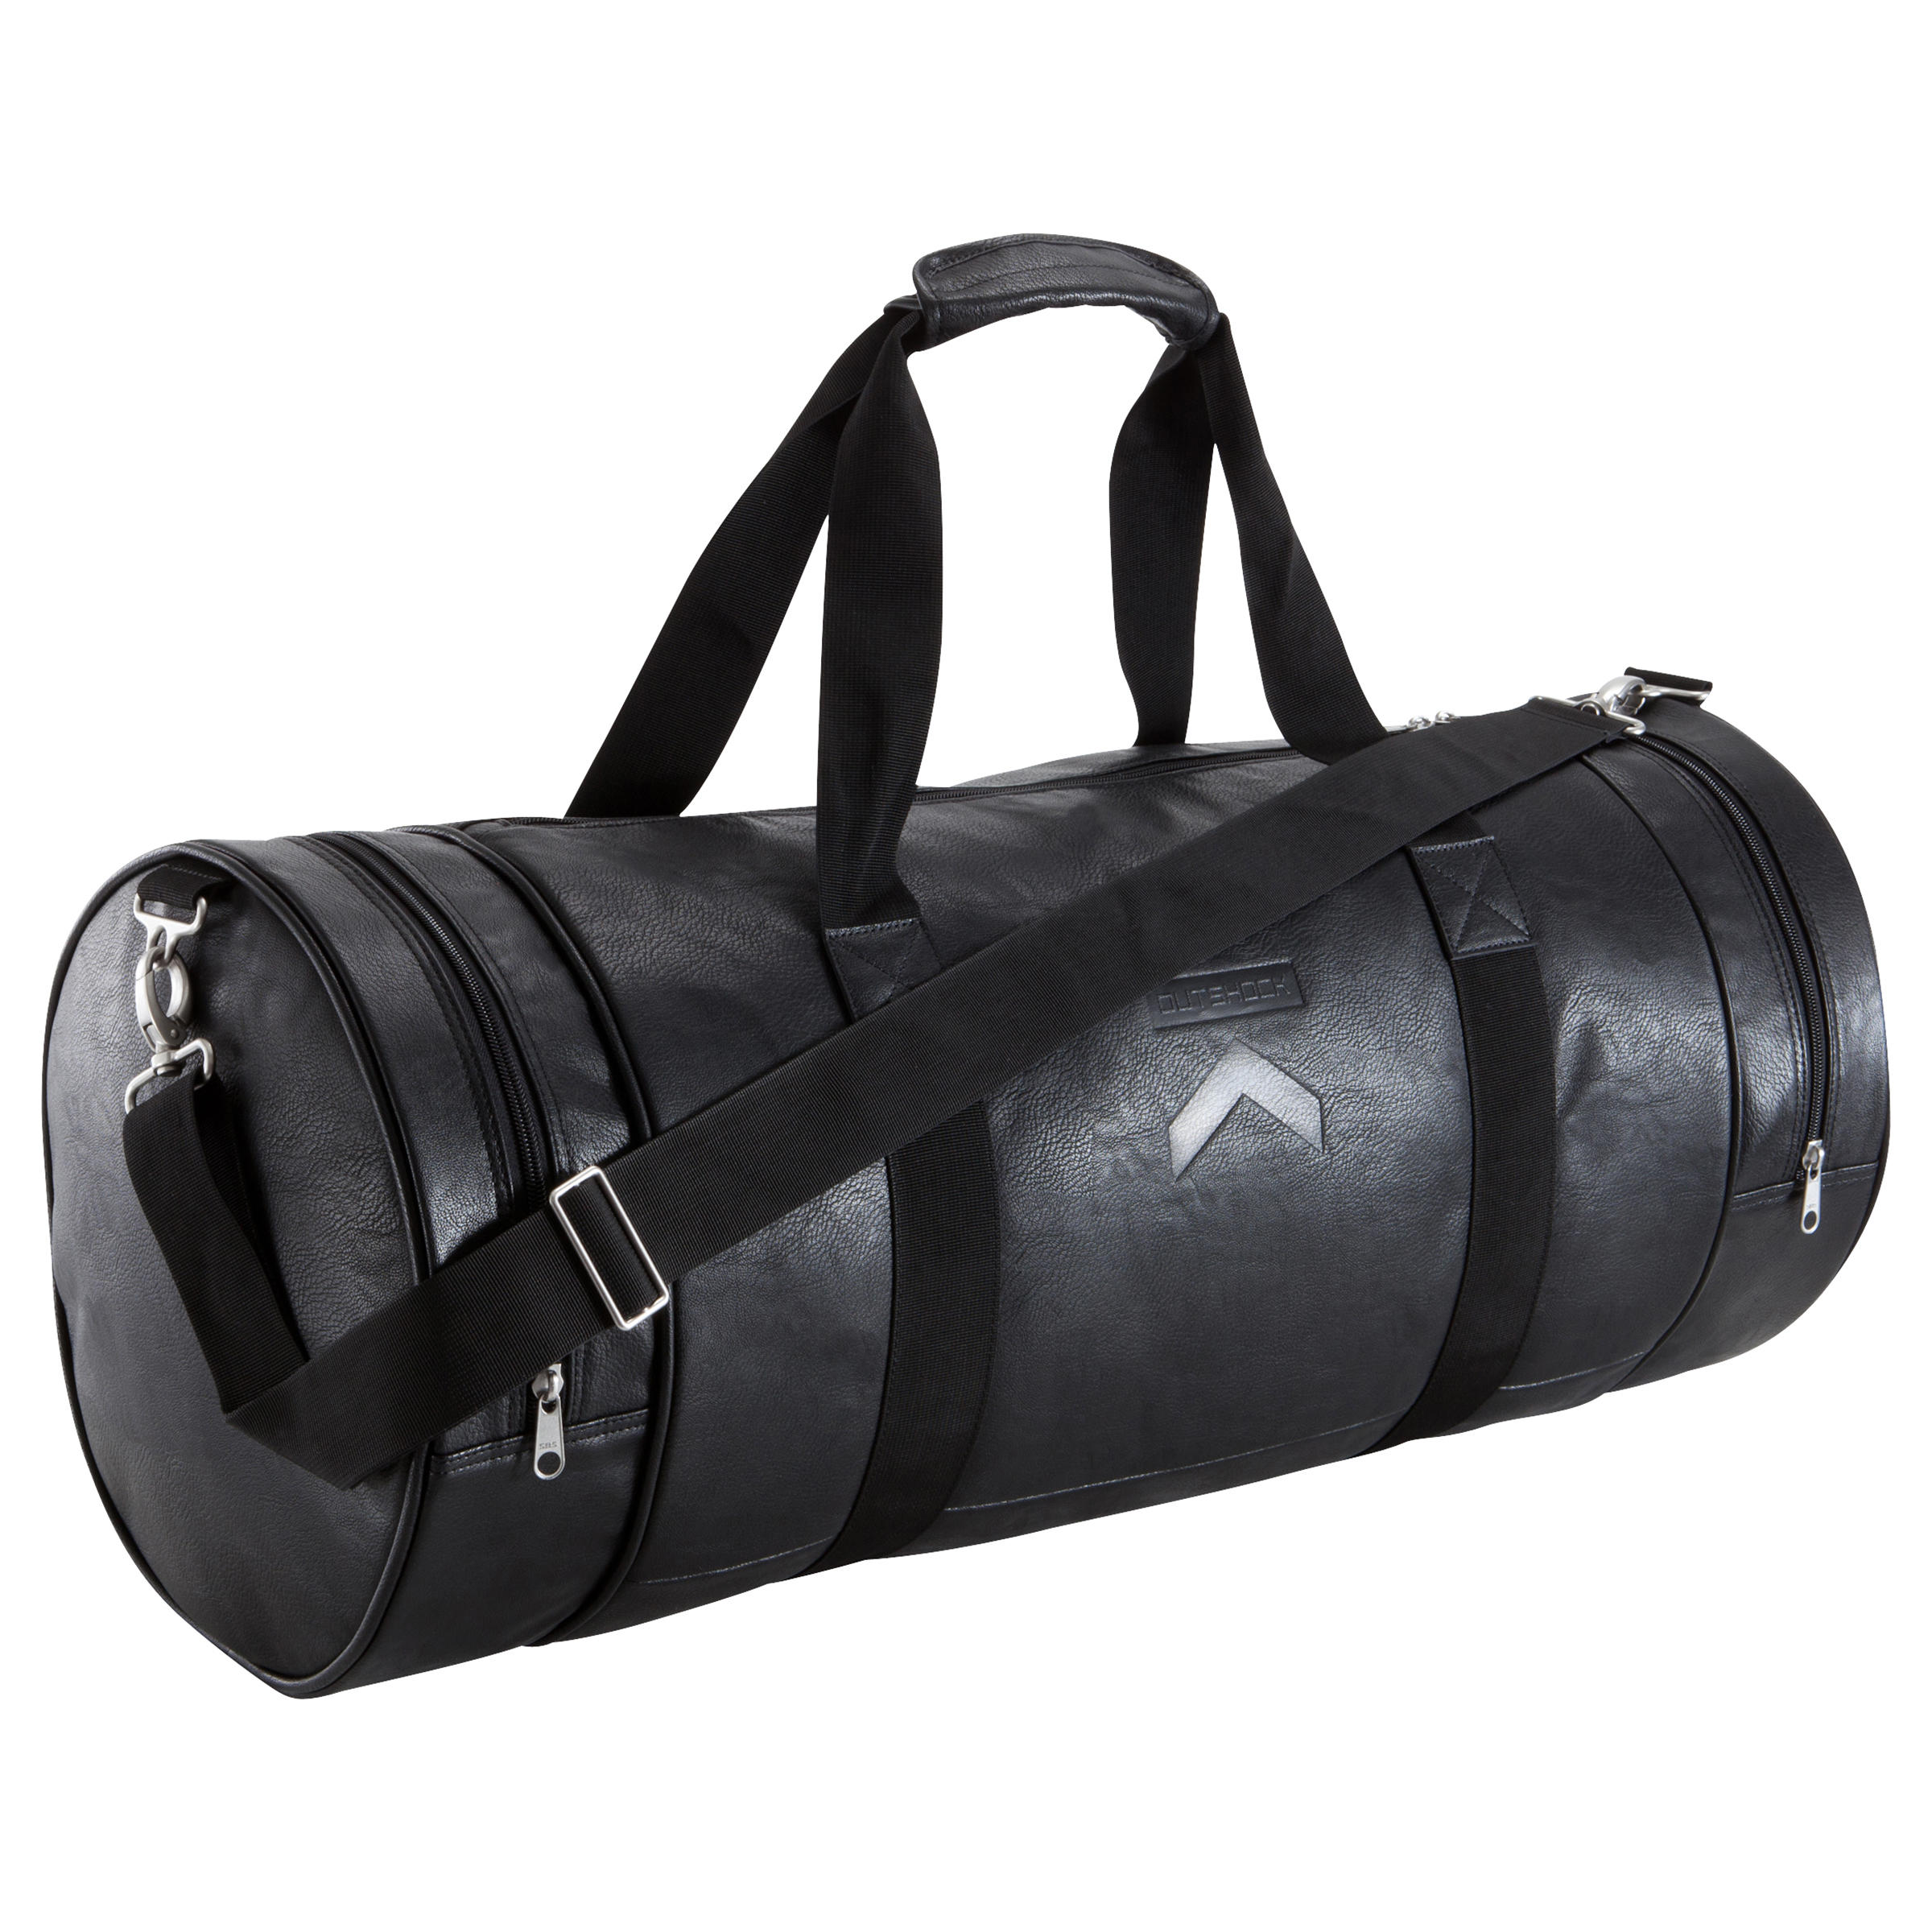 Outshock 900 Combat Sports Bag 60L  Black  Amazonin Bags Wallets and  Luggage